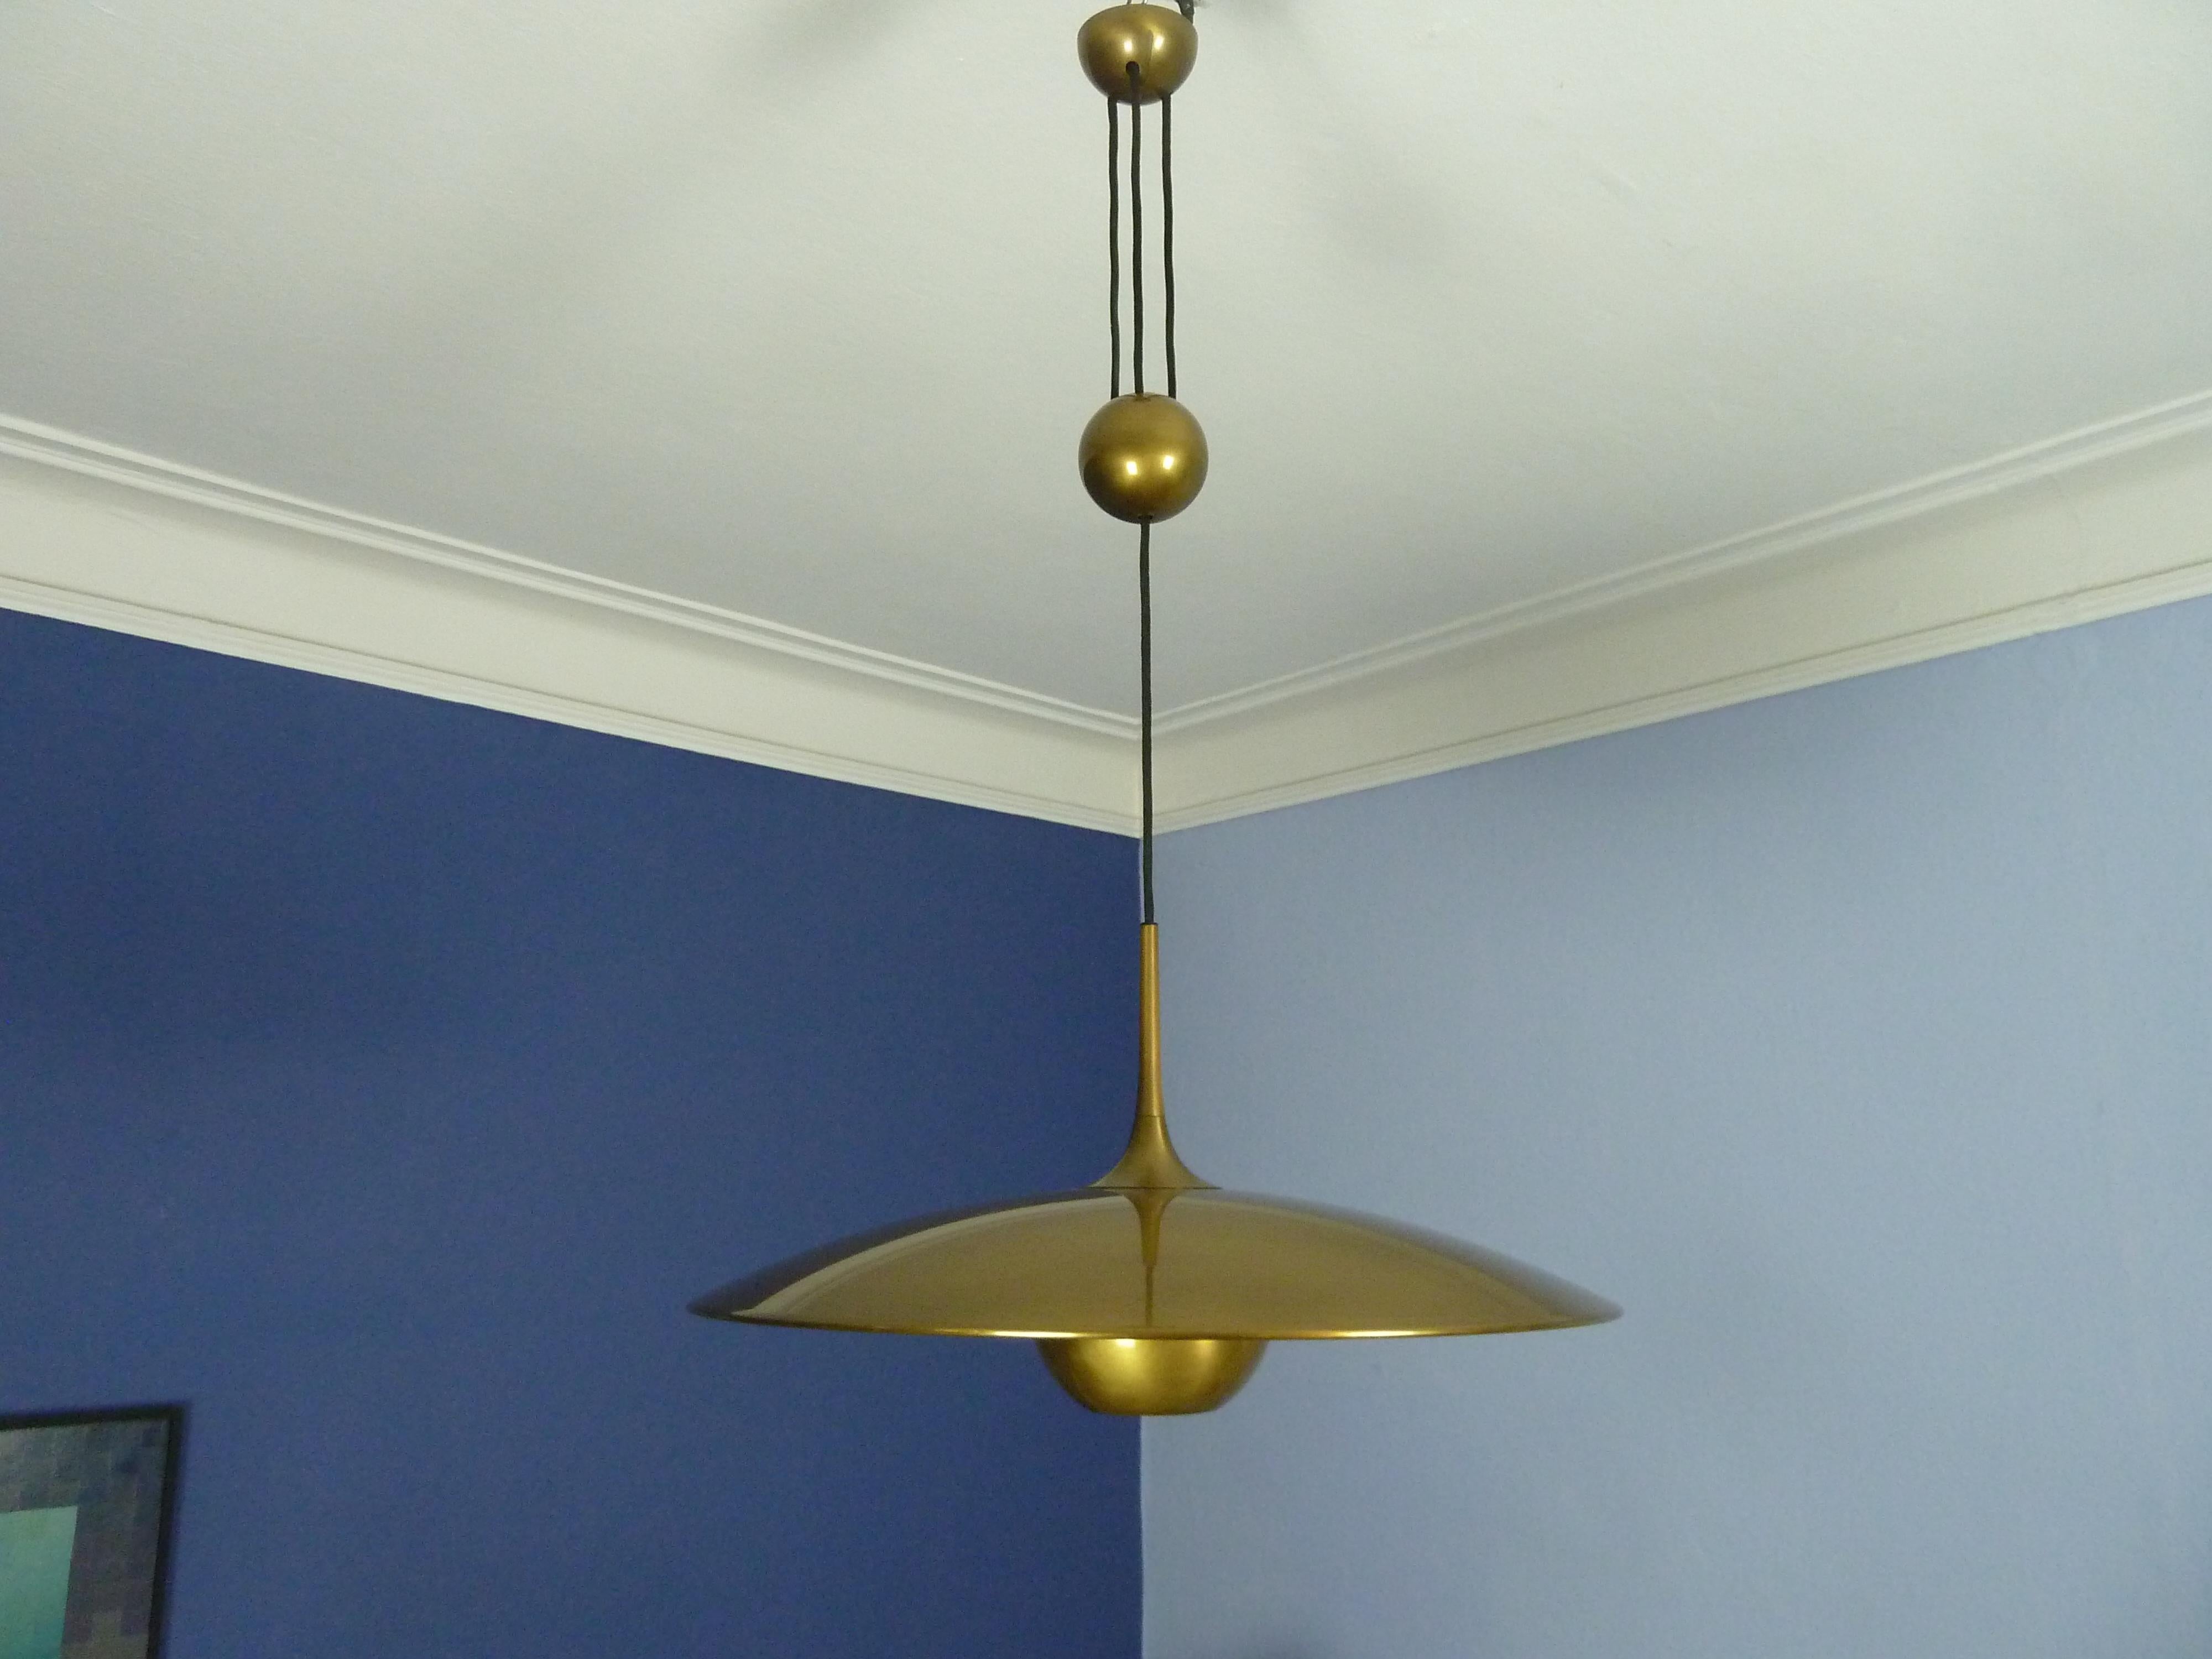 German Adjustable Brass Pendant Onos55 by Florian Schulz with a Central Counterweight